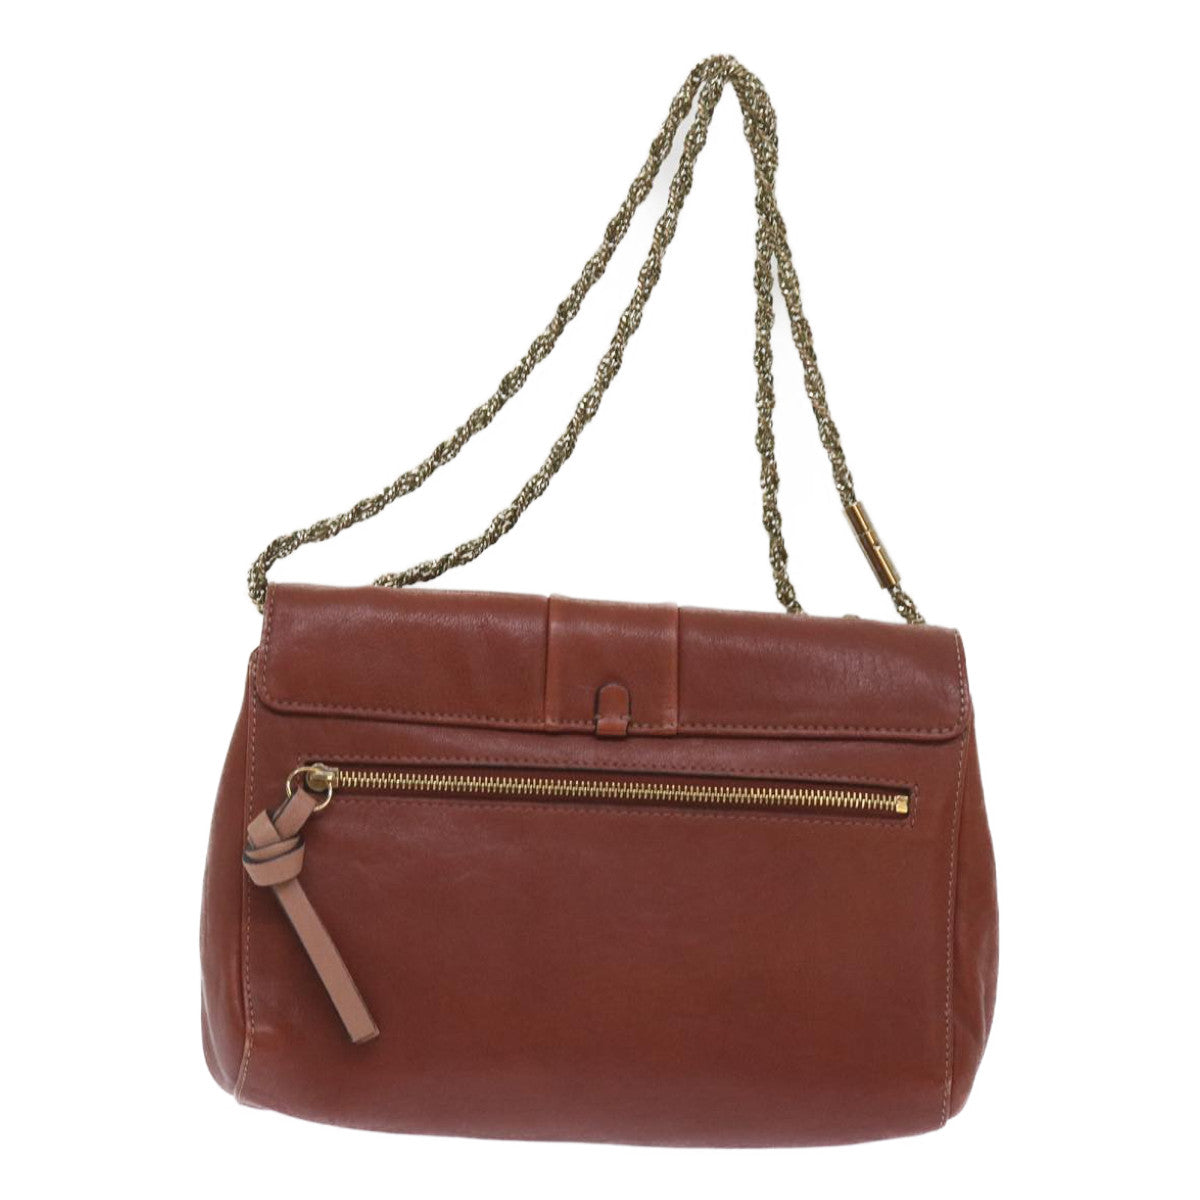 Chloe Ribbon Chain Shoulder Bag Leather Brown Auth yk10580 - 0